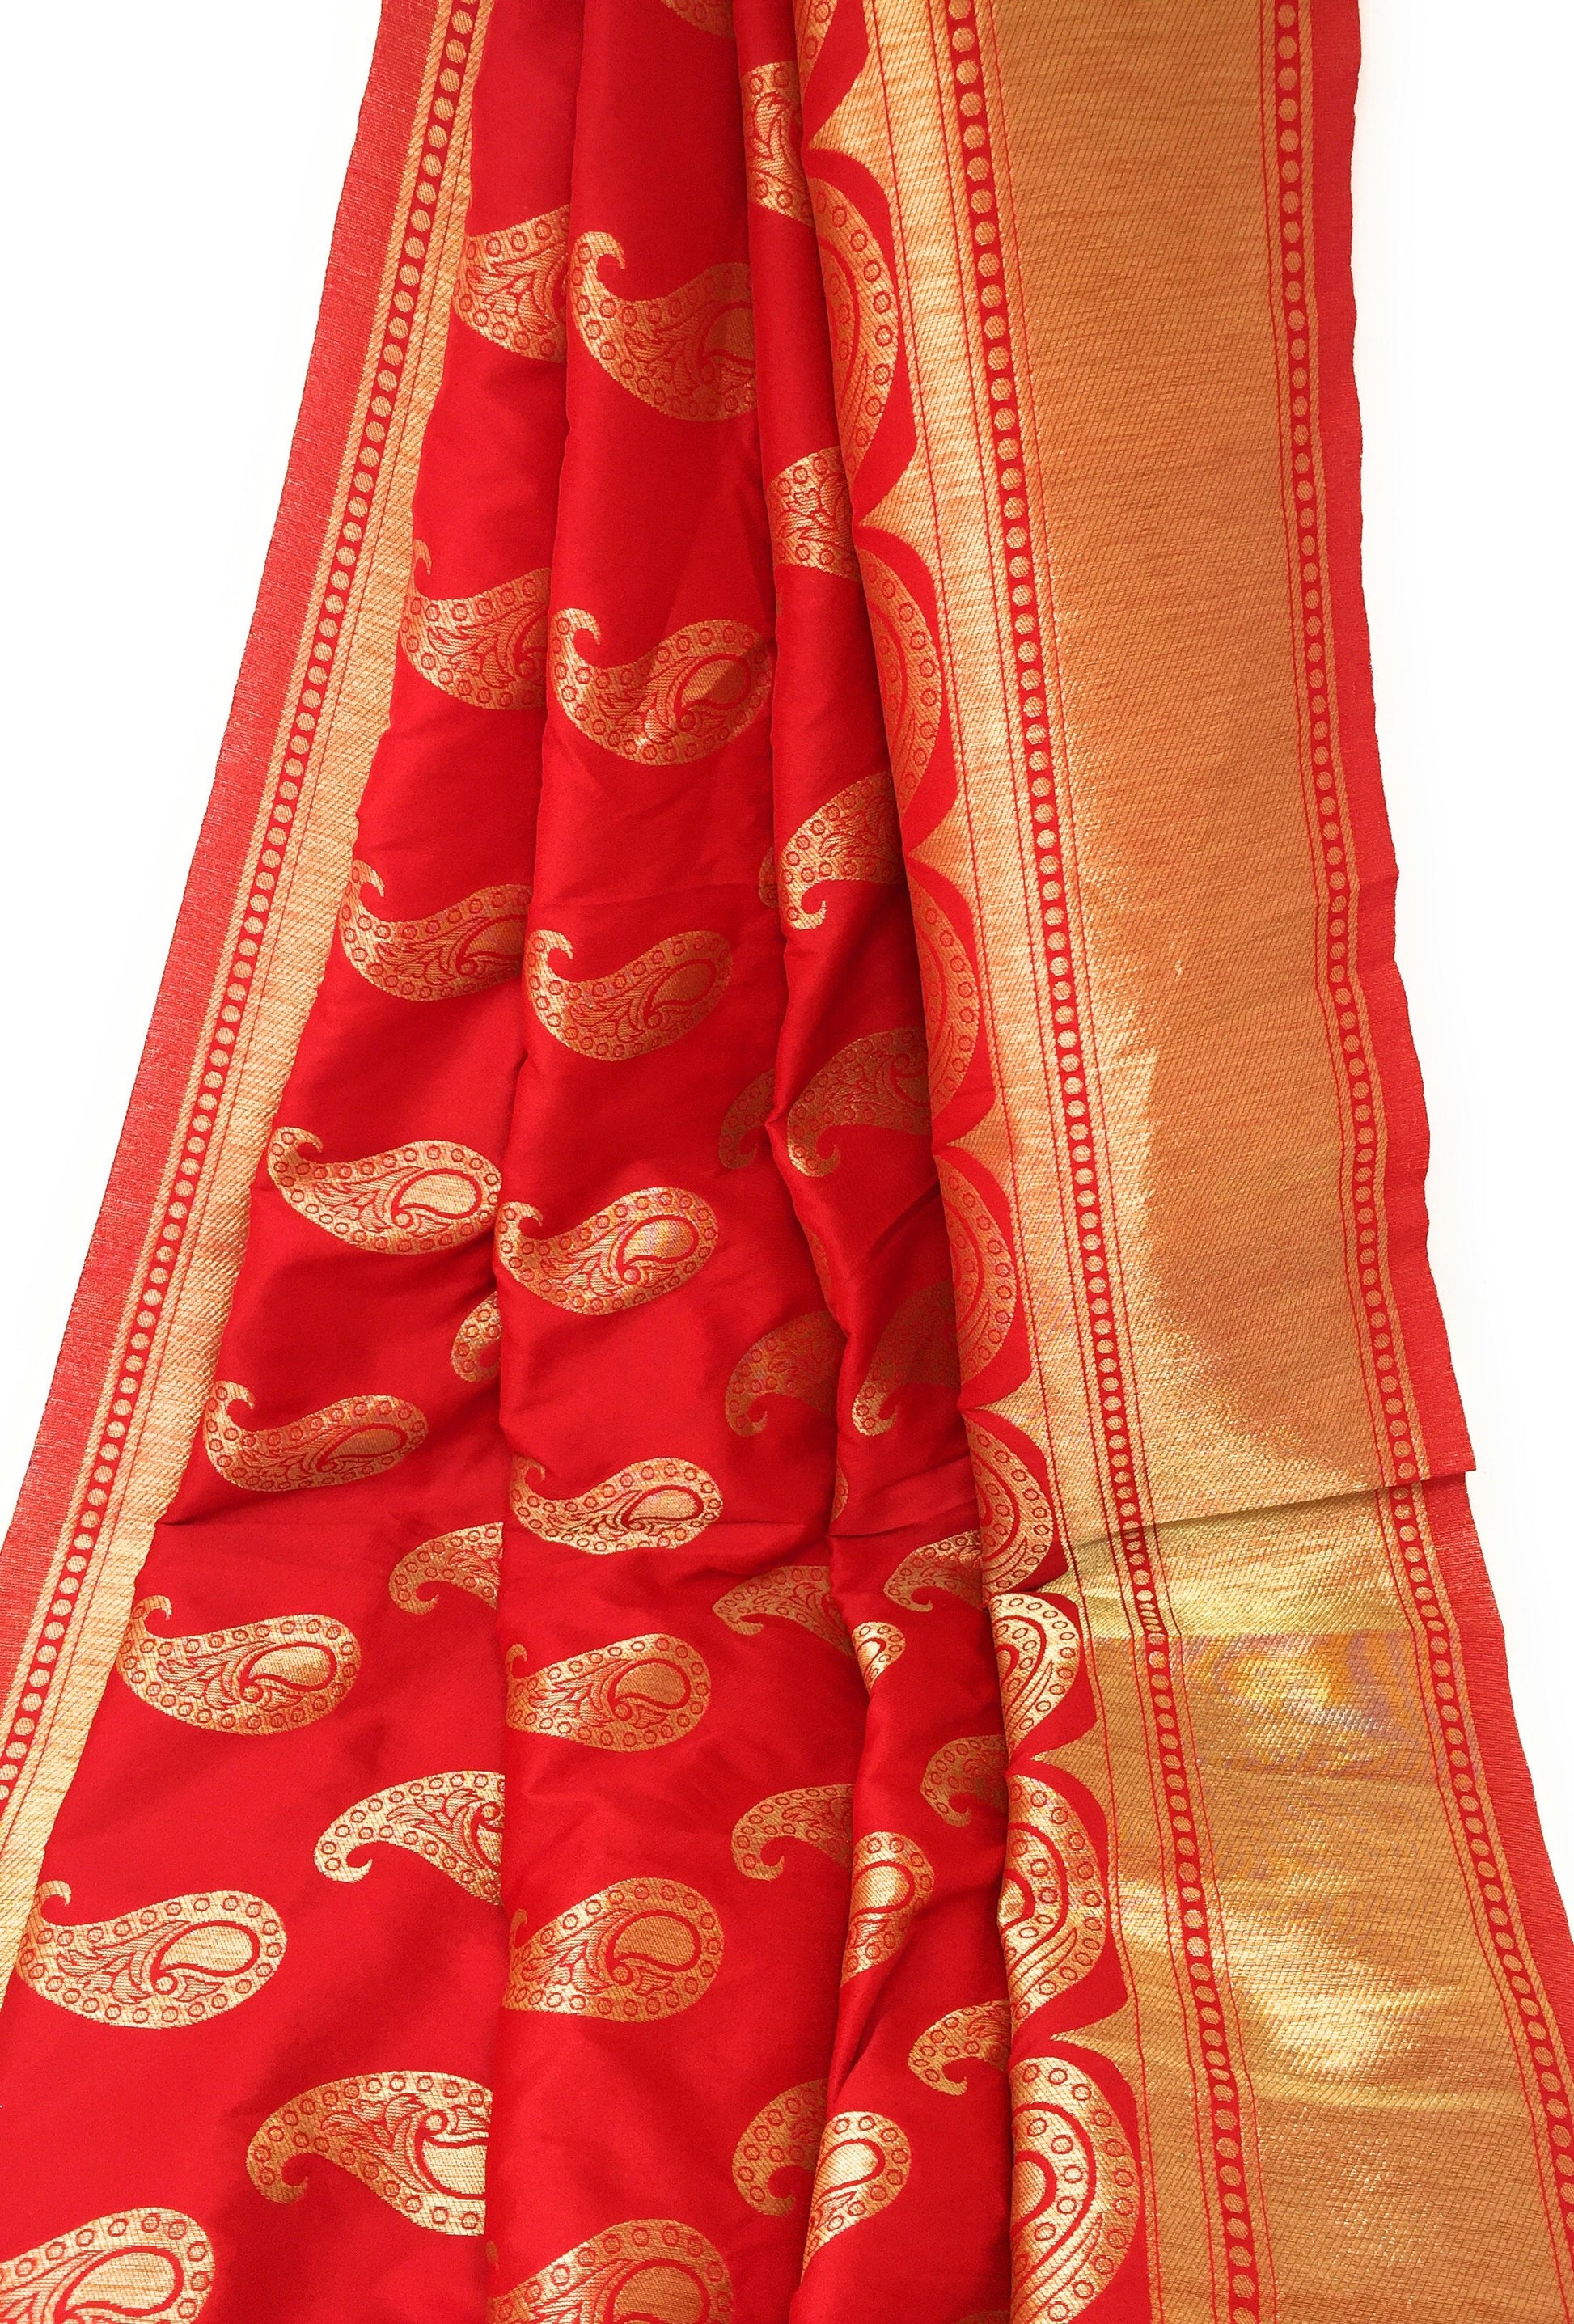 Red Brocade Fabric With Gold Paisley Motifs N Gold Border  